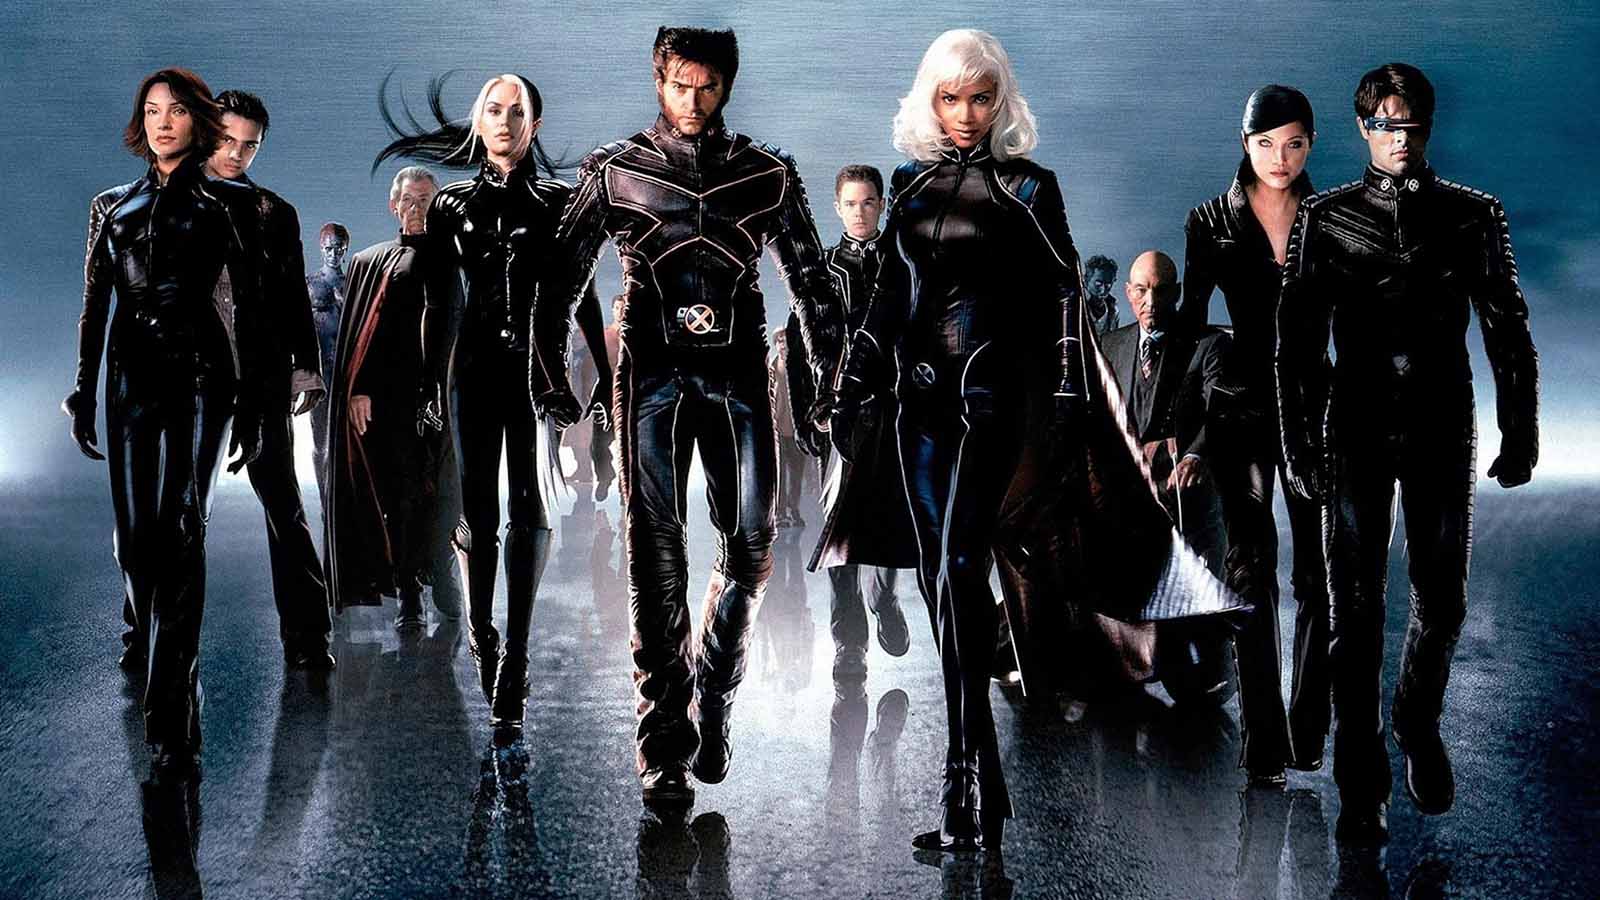 New allegations about what went down on the 'X-Men' set have come out, and it does not look good for director Bryan Singer again.